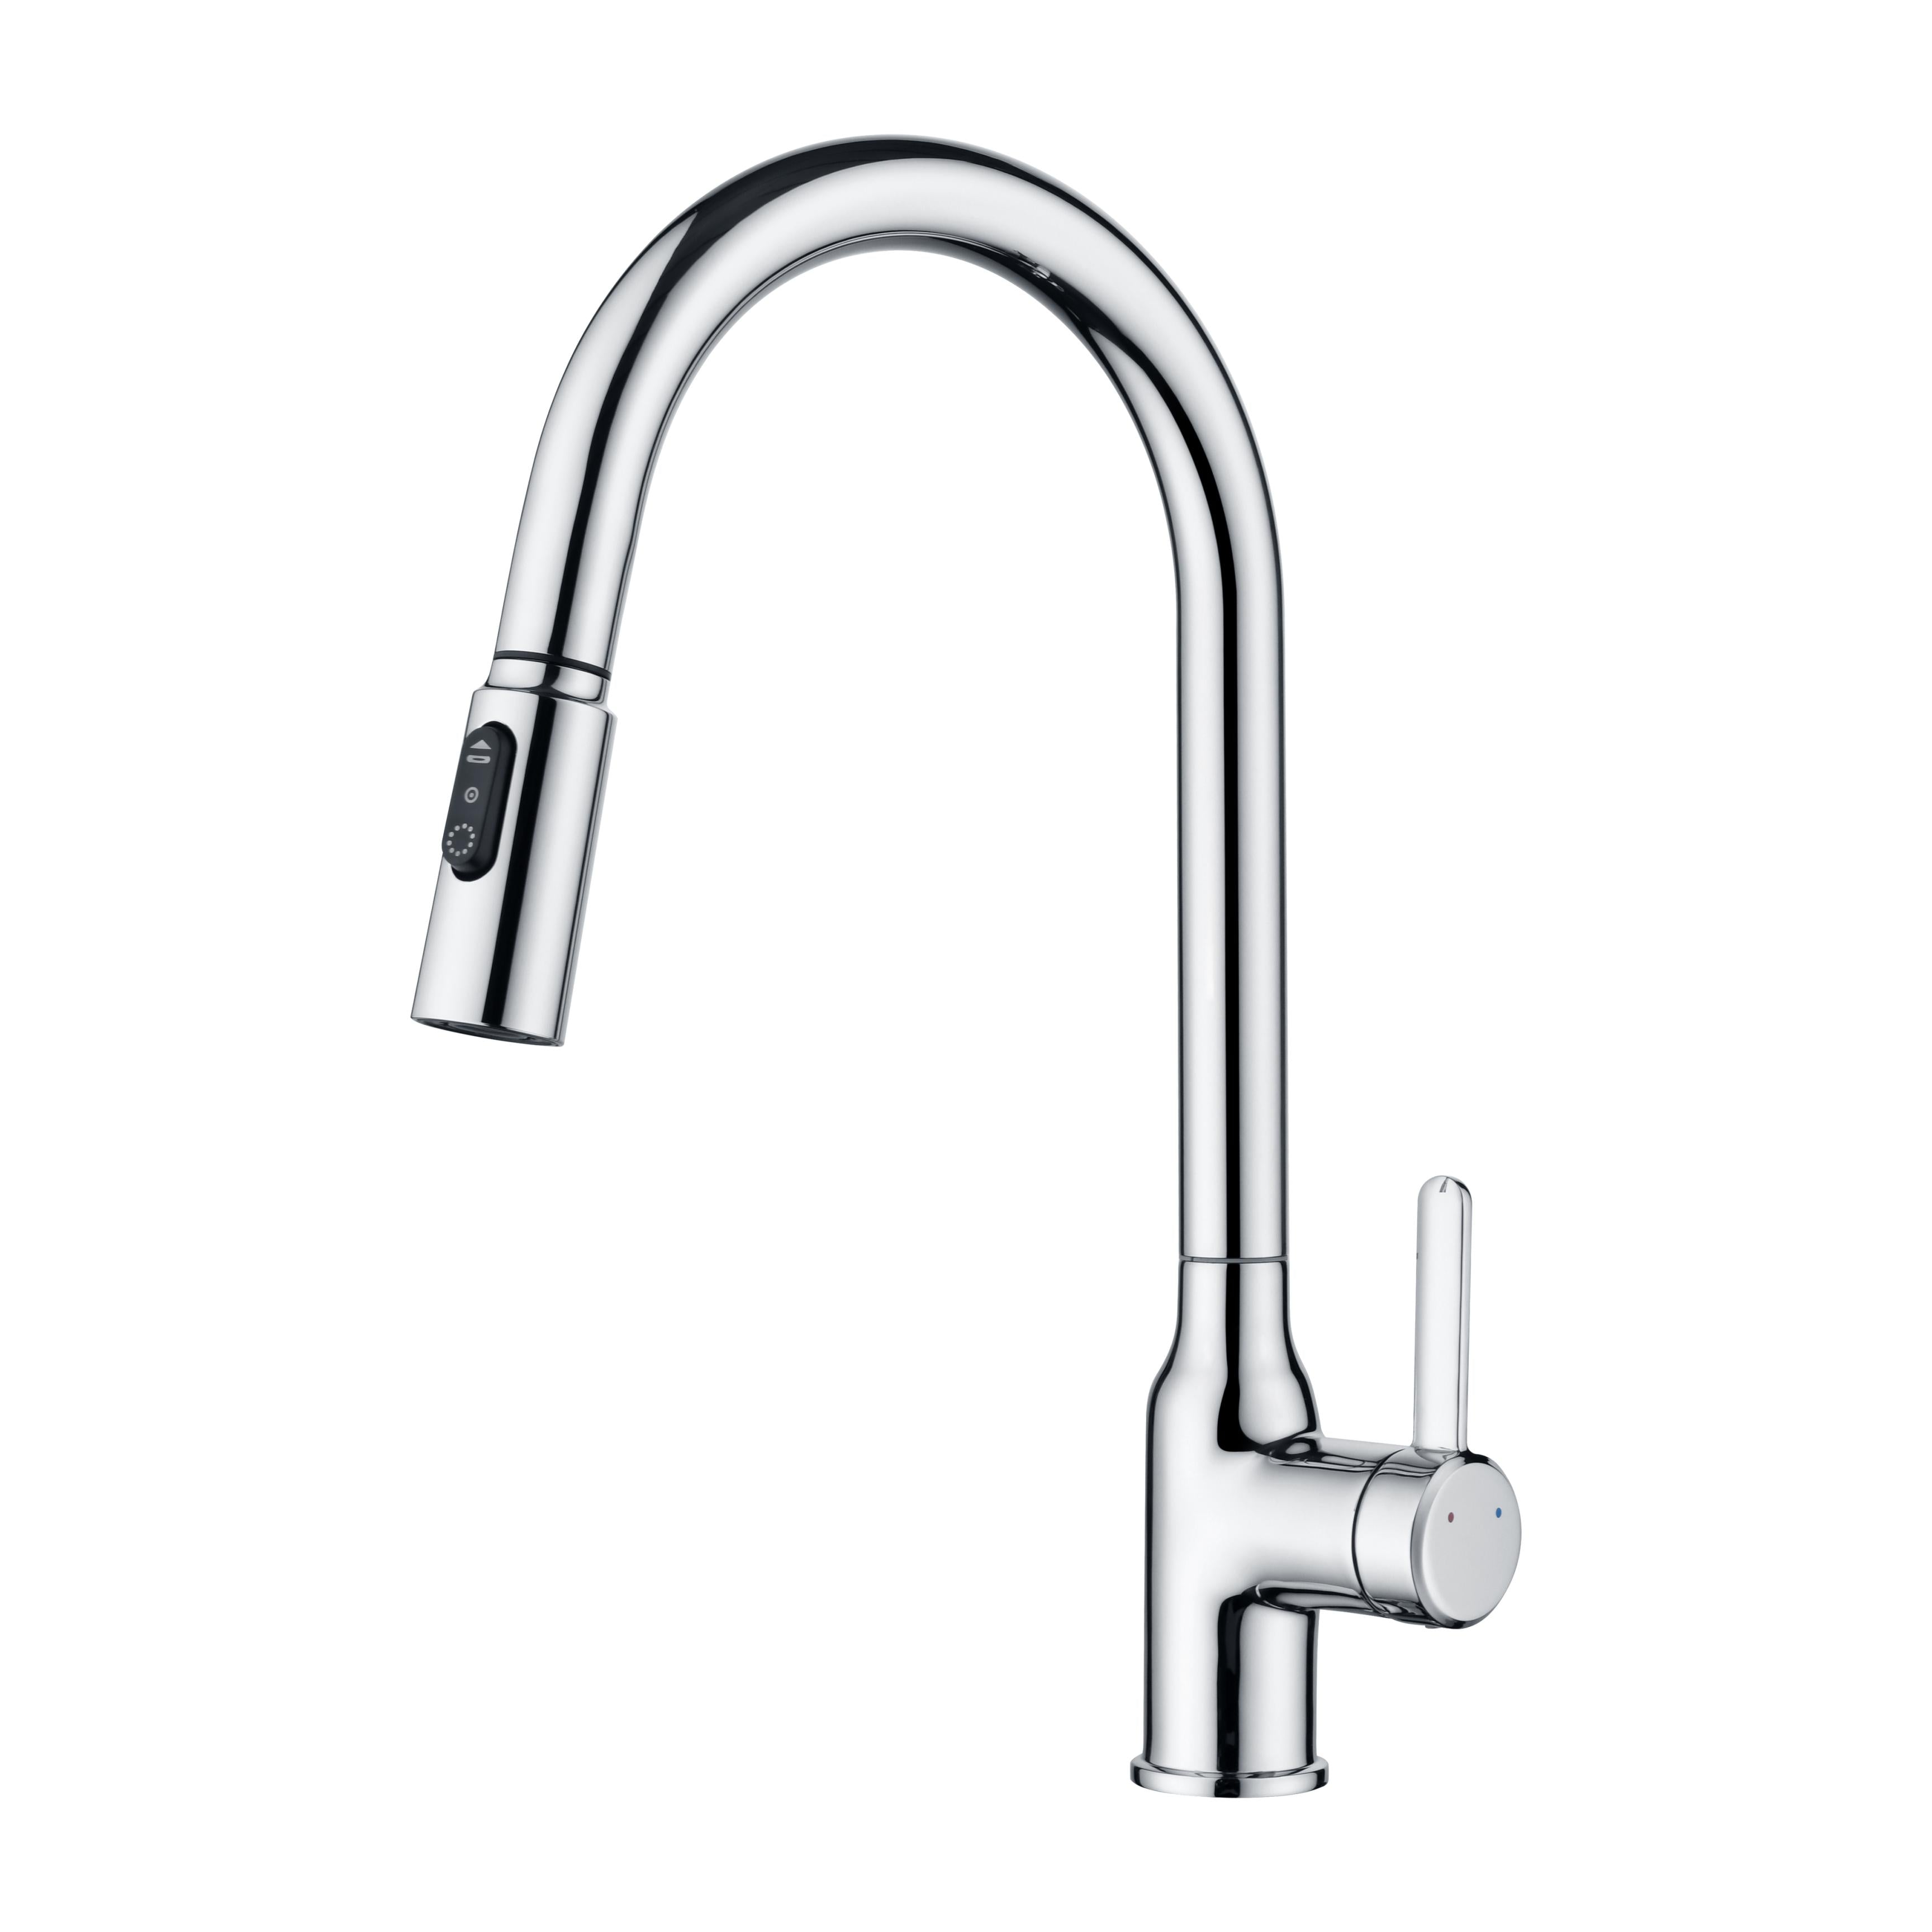 LM-9007-CP Chrome Single Handle Pull-out kitchen mixer